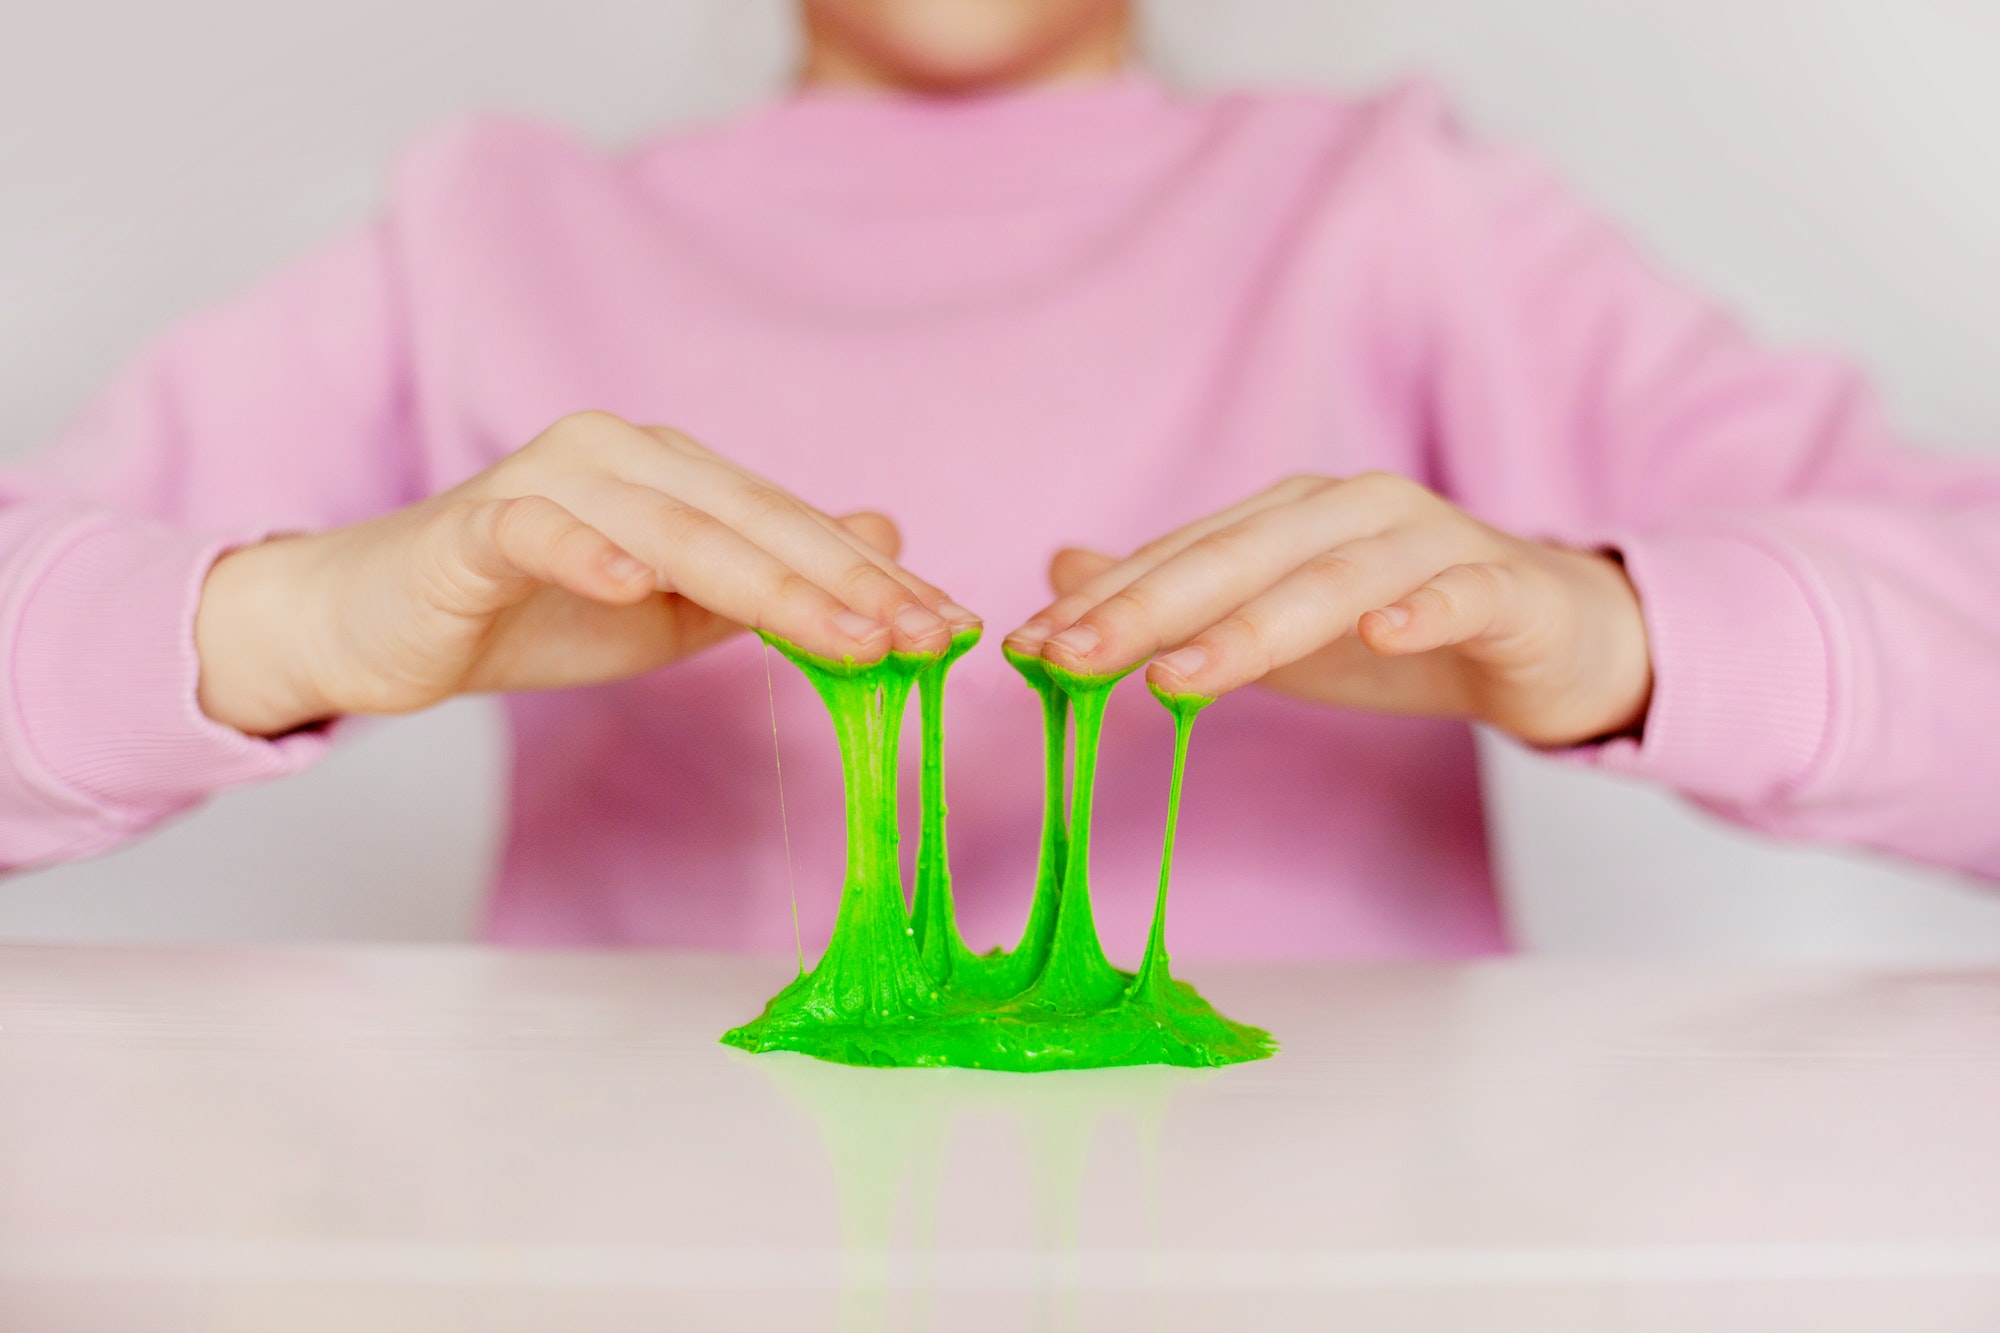 Hands hold a homemade toy called slime. A child plays with green sticky slime